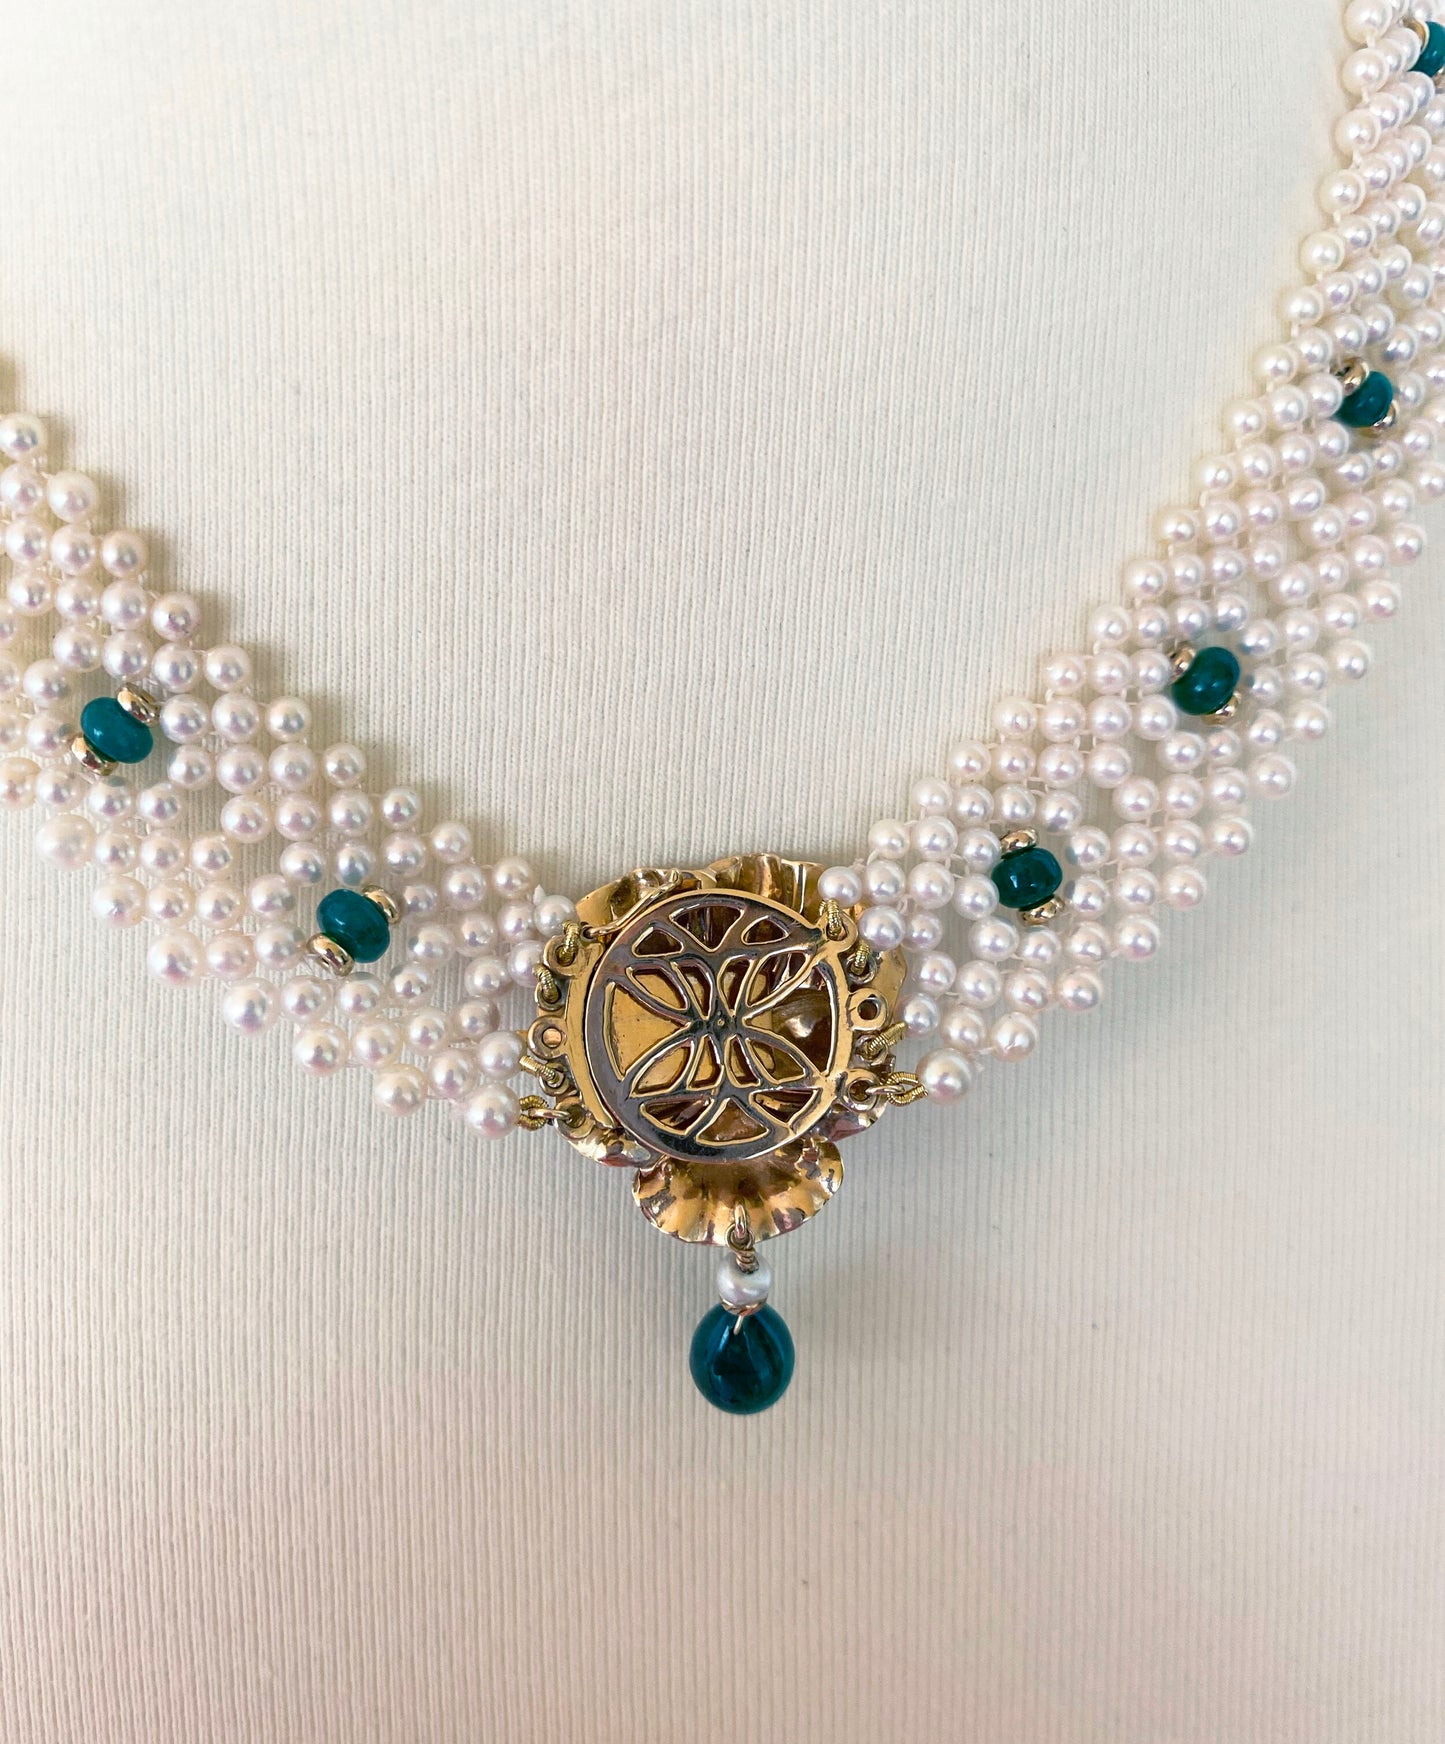 Marina J Woven Pearl and Emerald Necklace with Vintage Gold Centerpiece / Clasp